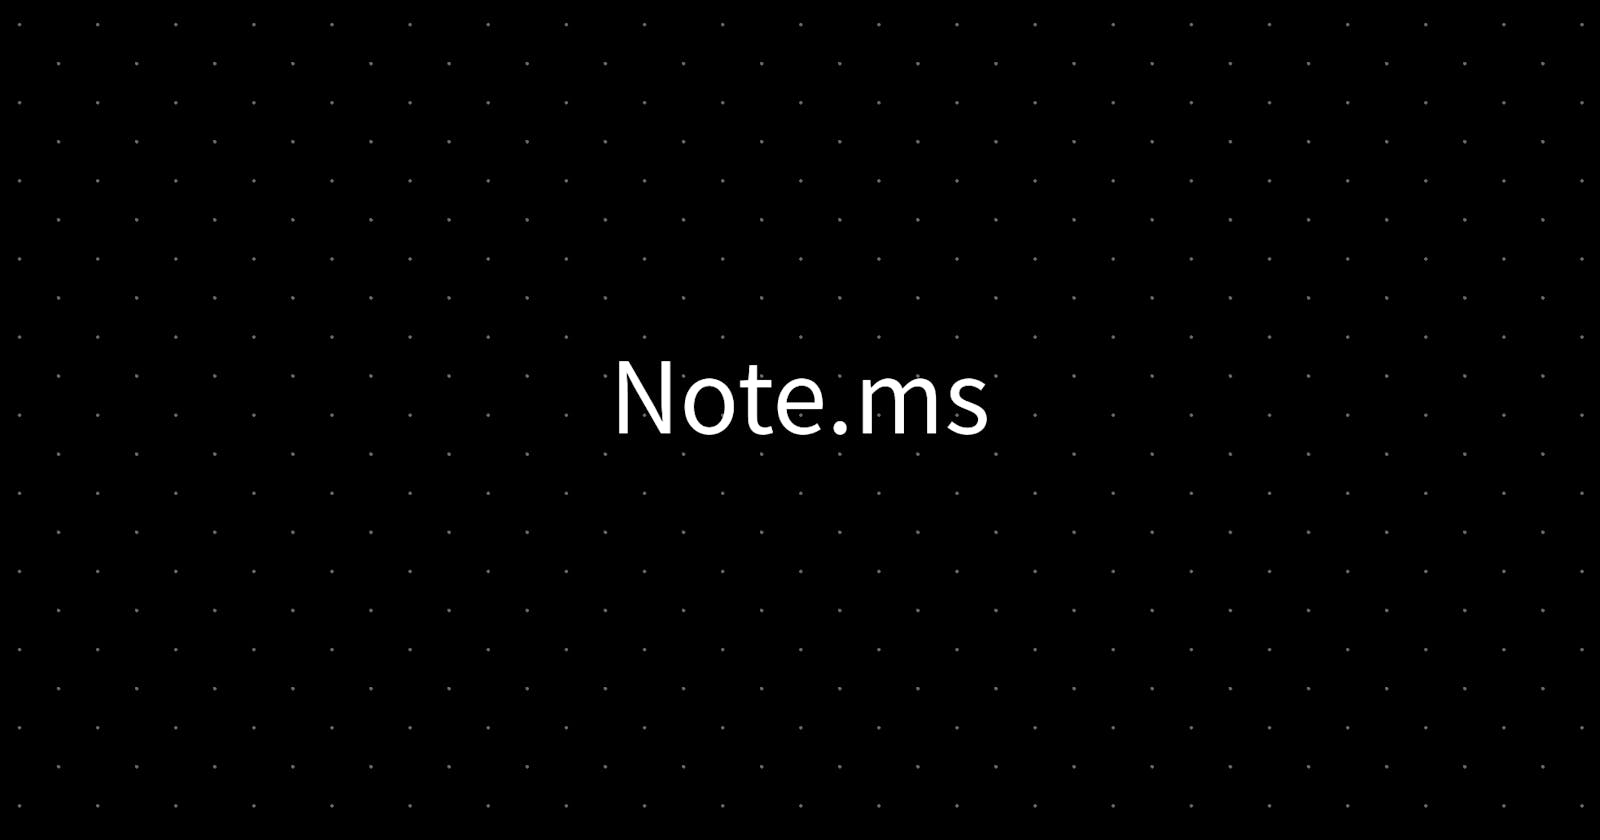 Note.ms